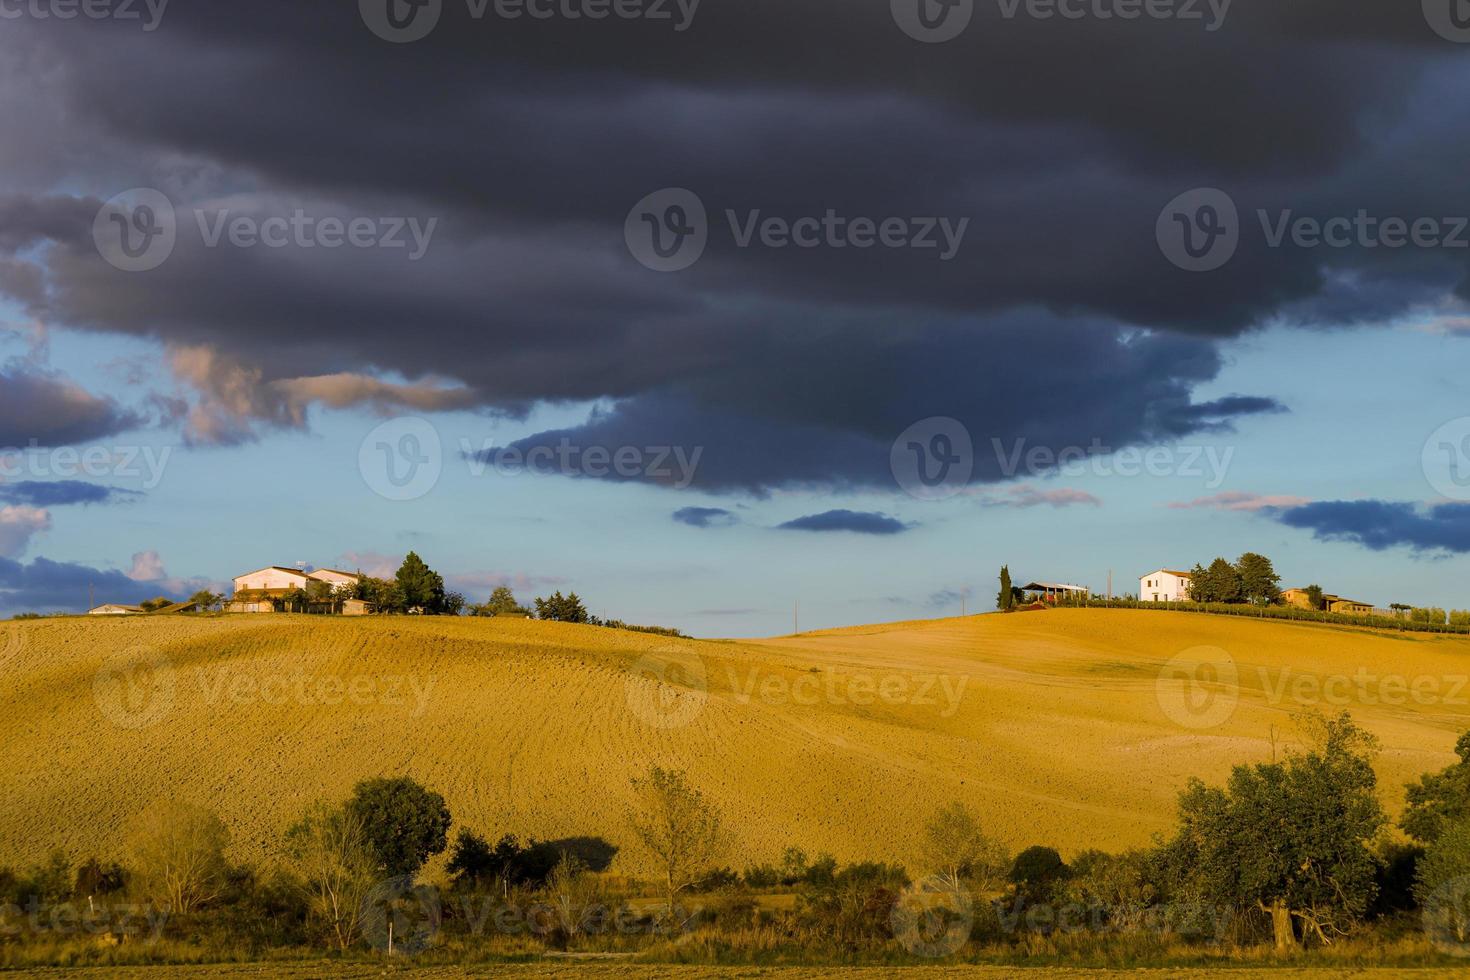 Villa in Italy, old farmhouse in the waves of tuscanian fields and hills photo